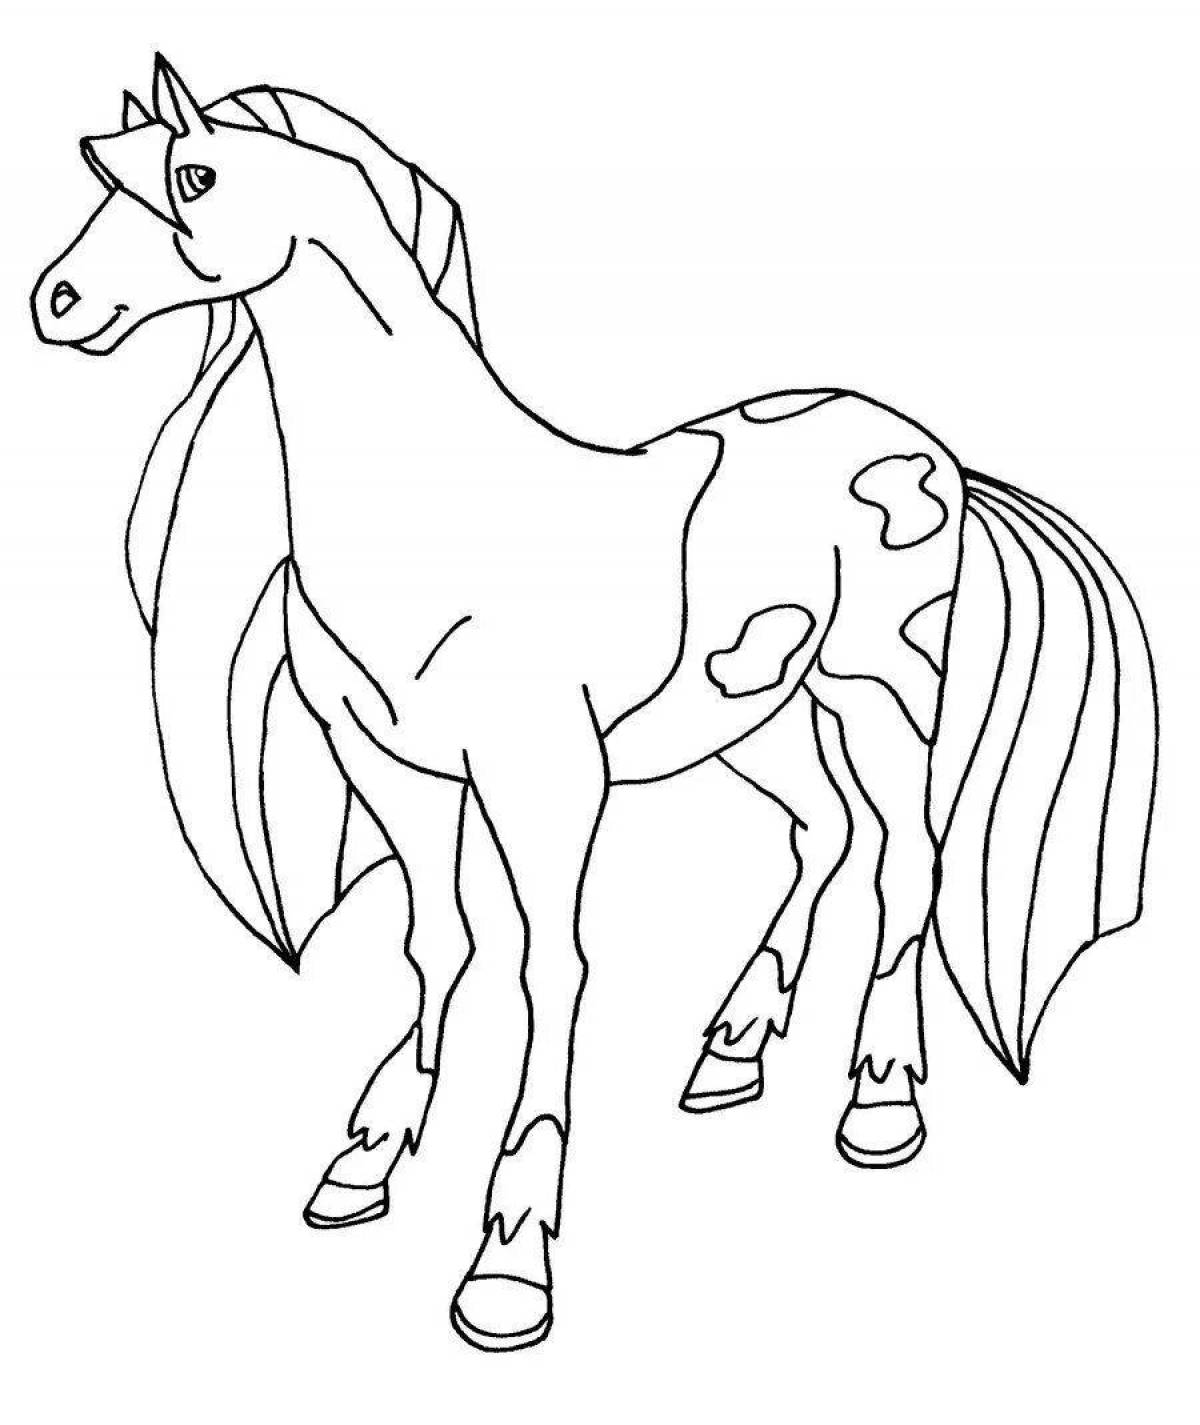 Exquisite cartoon horse coloring page